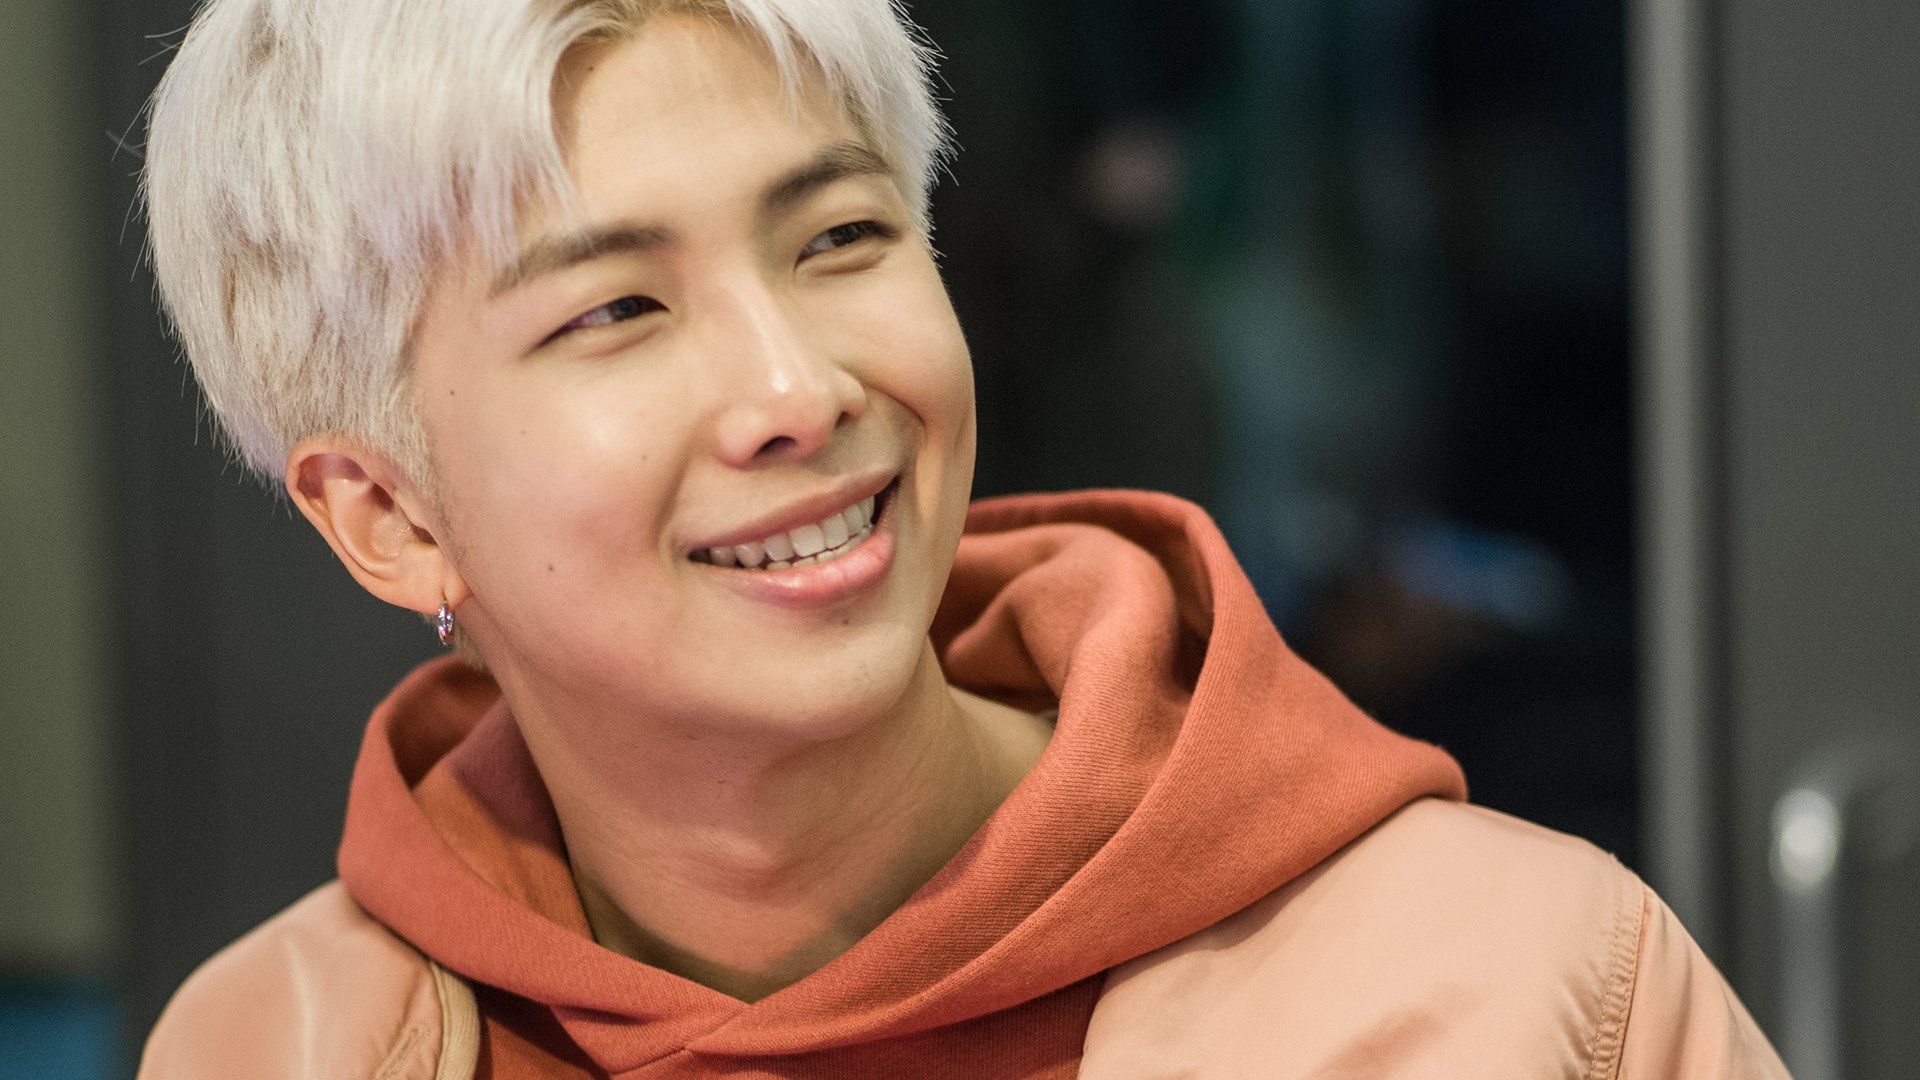 RM of BTS visits The Elvis Duran Z100 Morning Show at Z100 Studio on April 12, 2019 in New York City